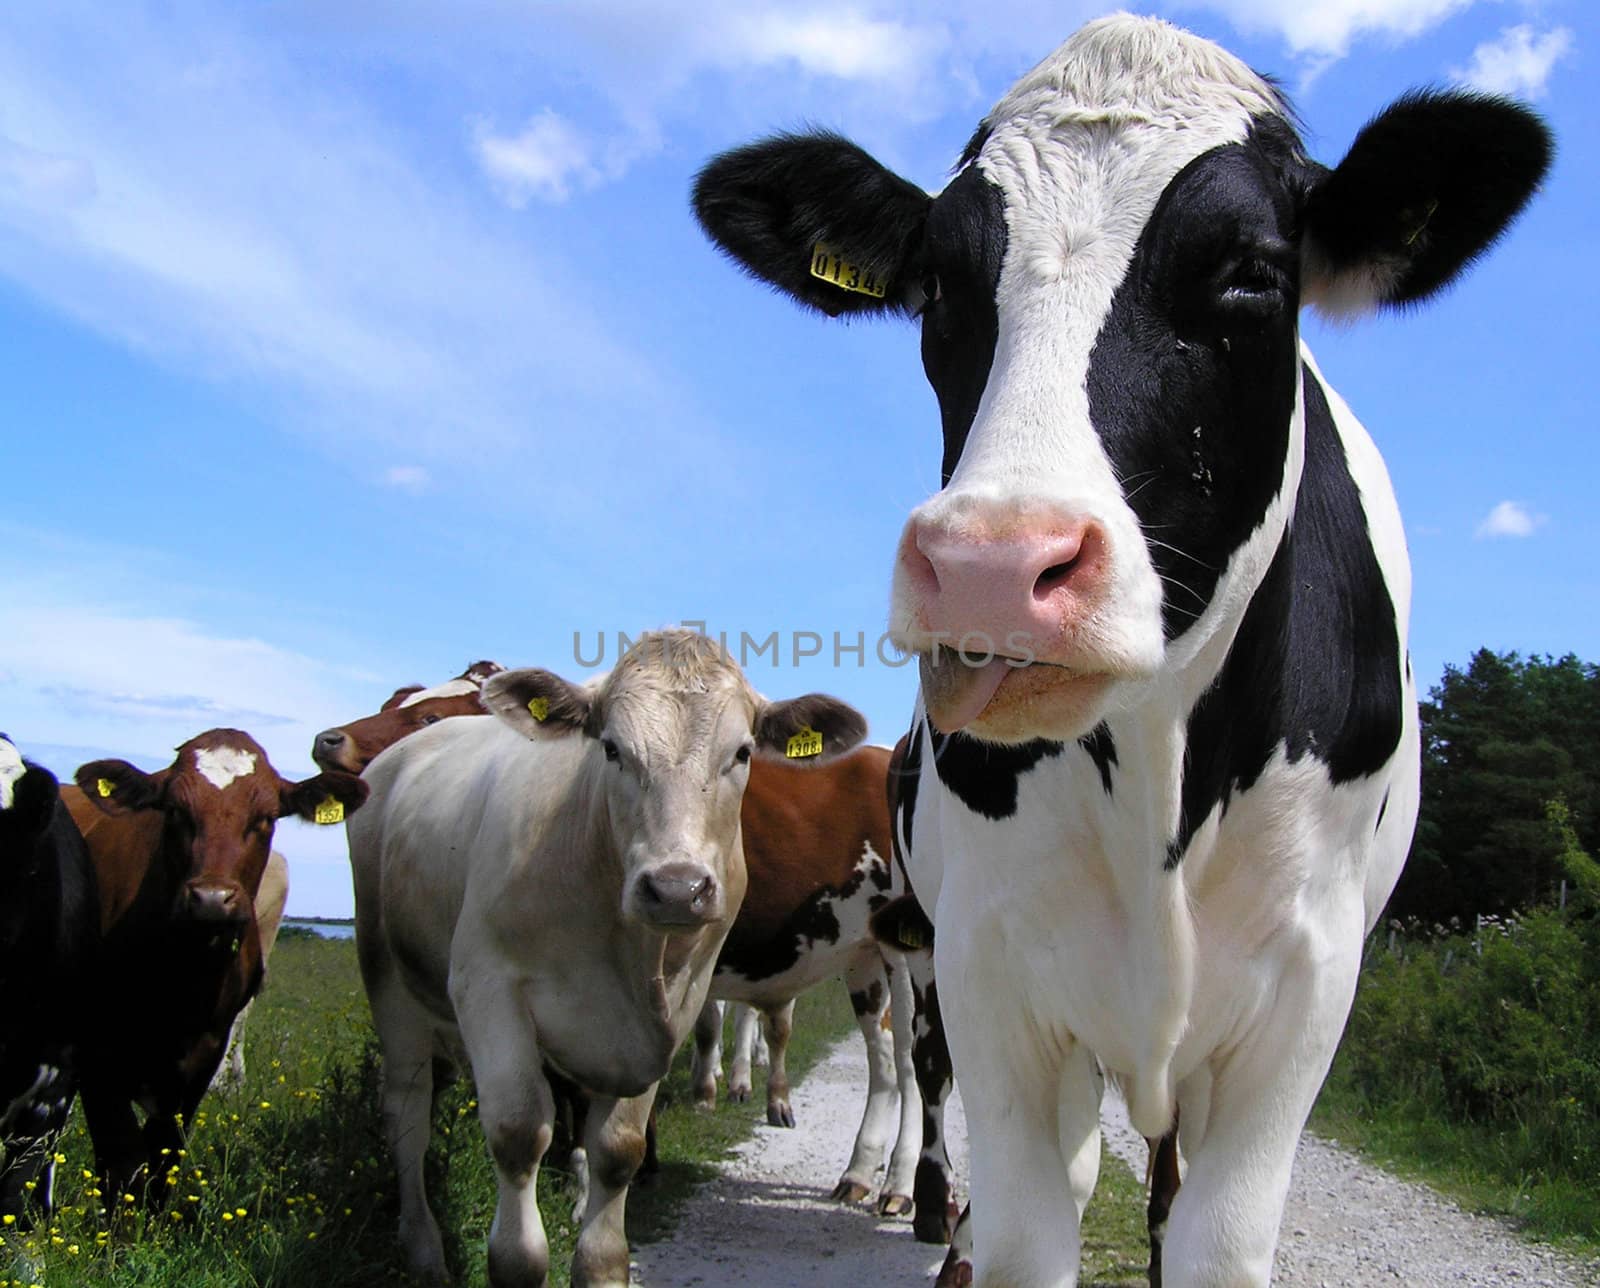 A very curious cow and his friends in the background.